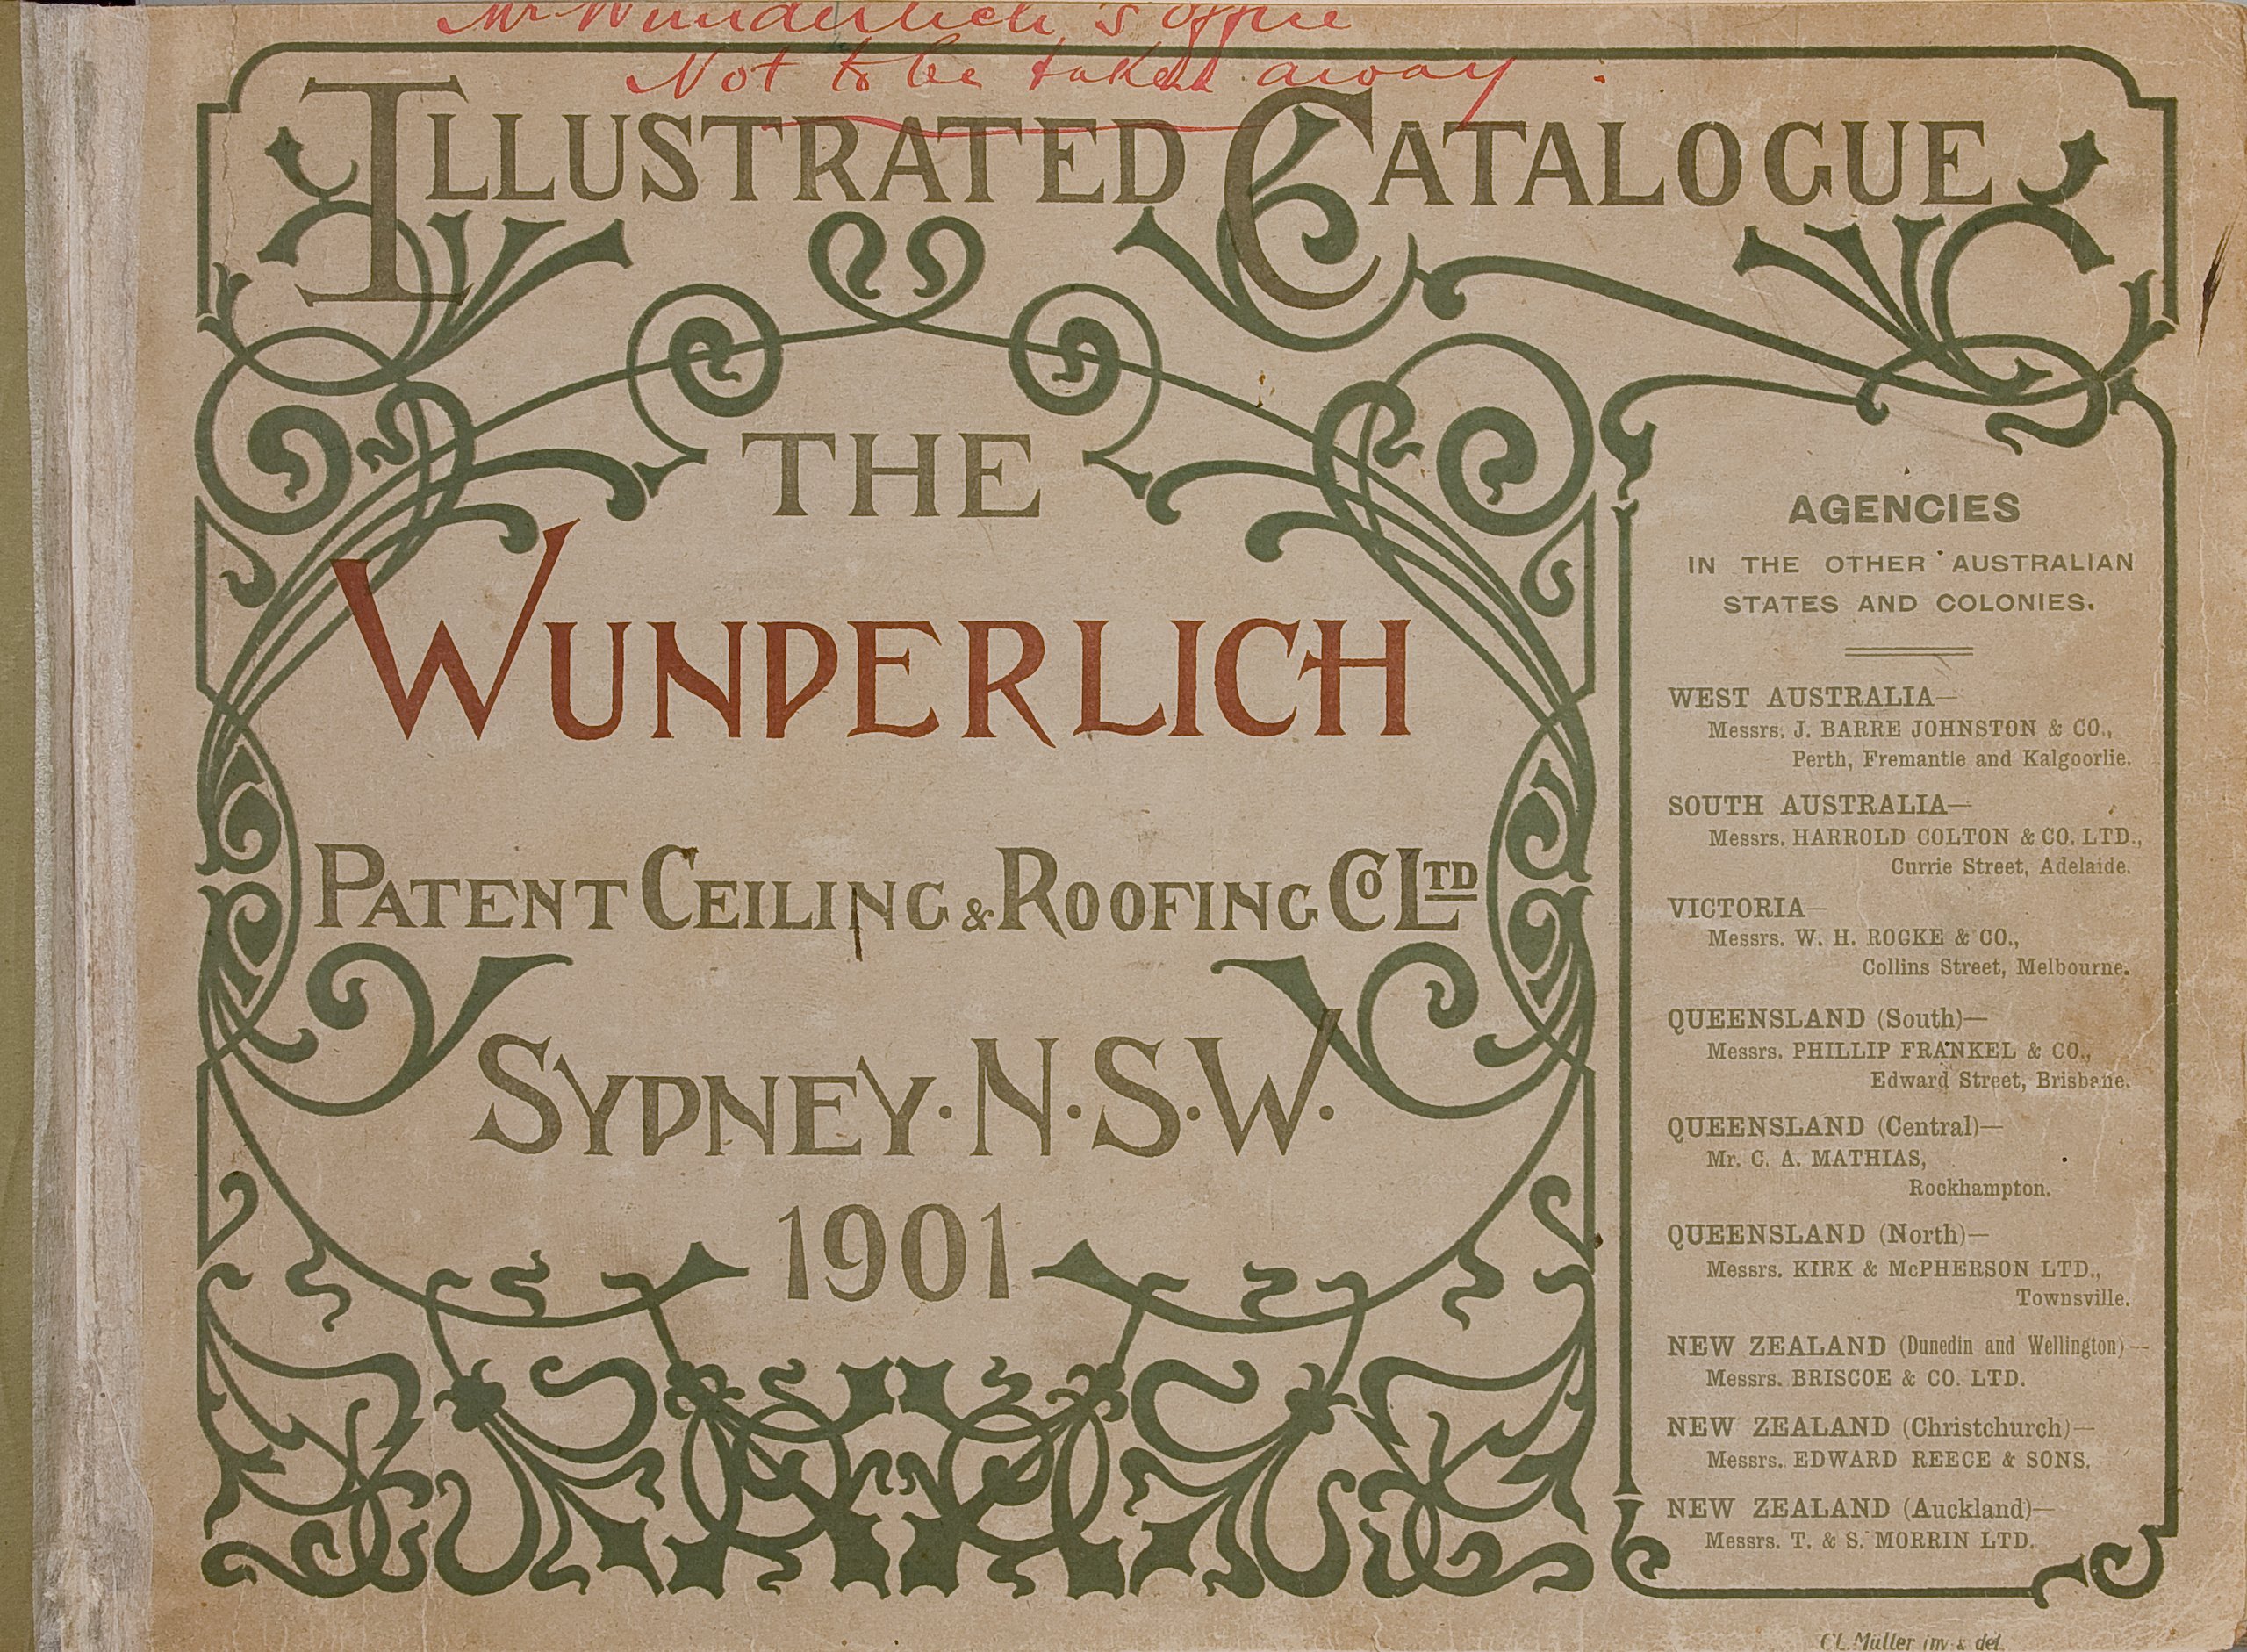 Front cover from Wunderlich 'Illustrated Catalogue'